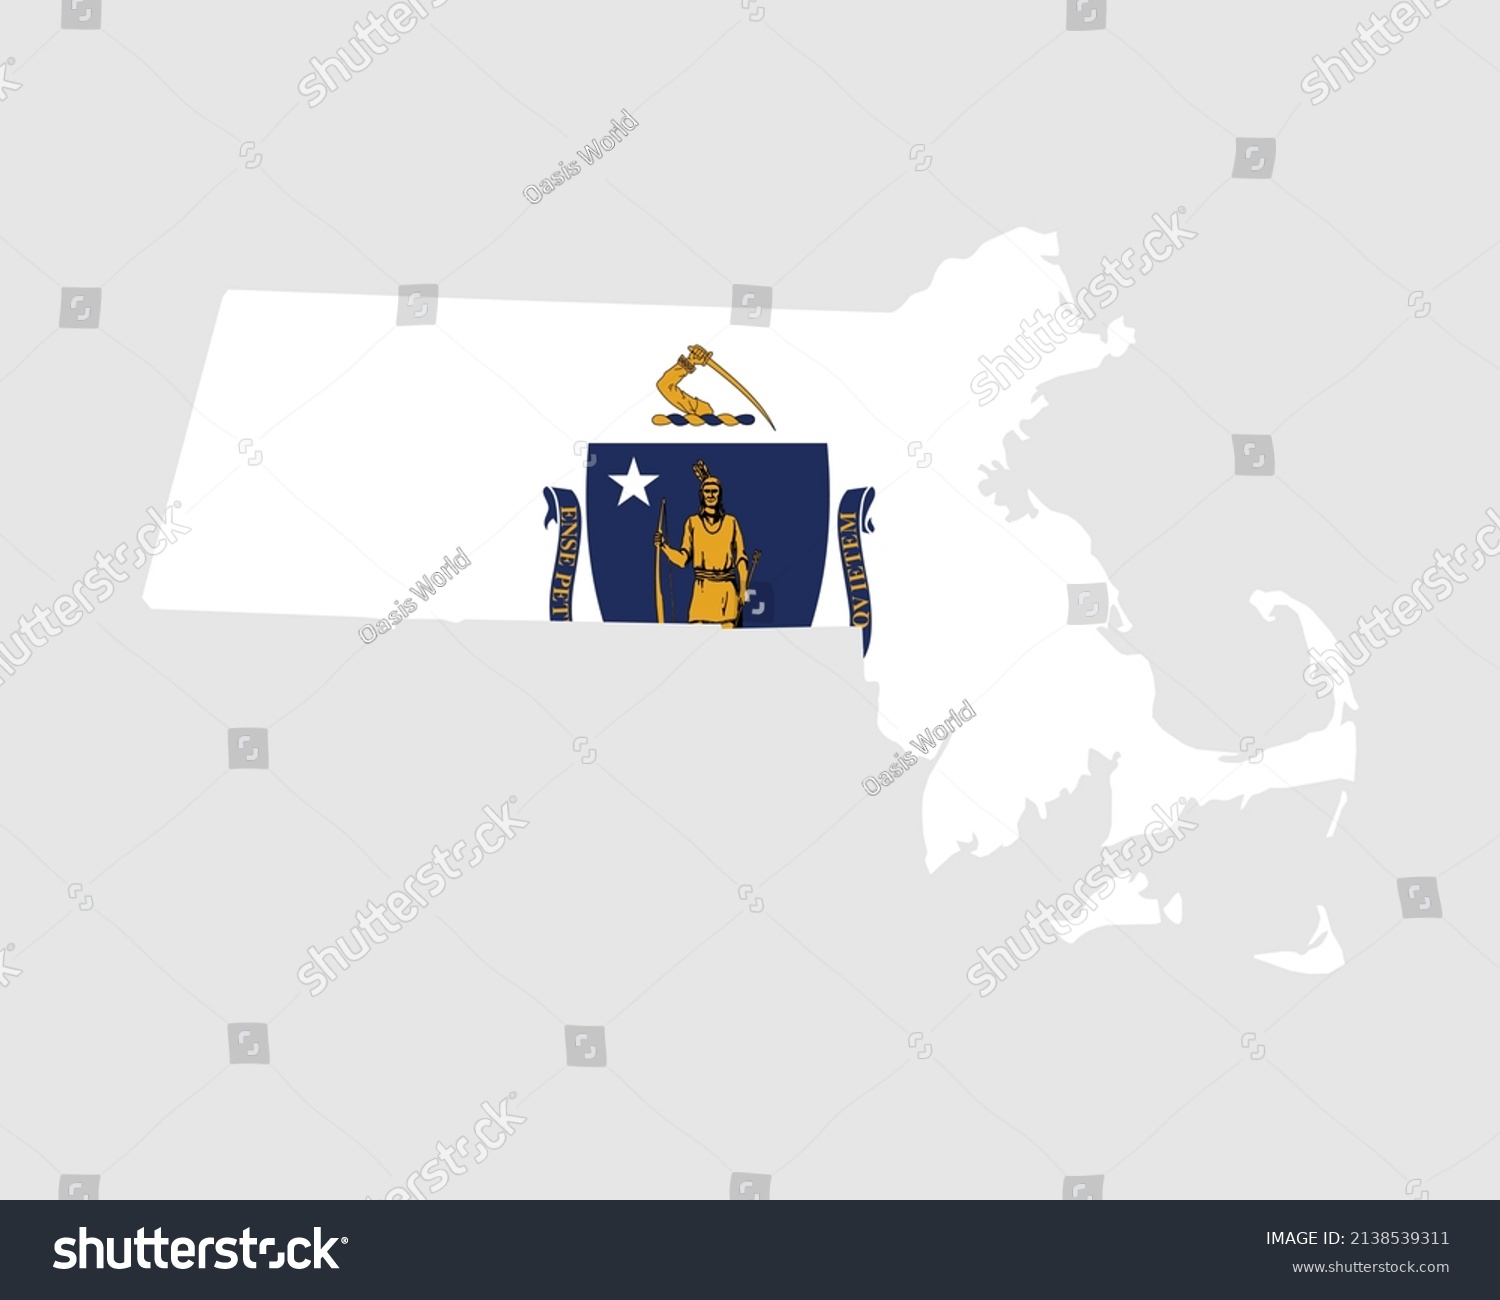 SVG of Massachusetts Map Flag. Map of MA, USA with the state flag. United States, America, American, United States of America, US State Banner. Vector illustration. svg